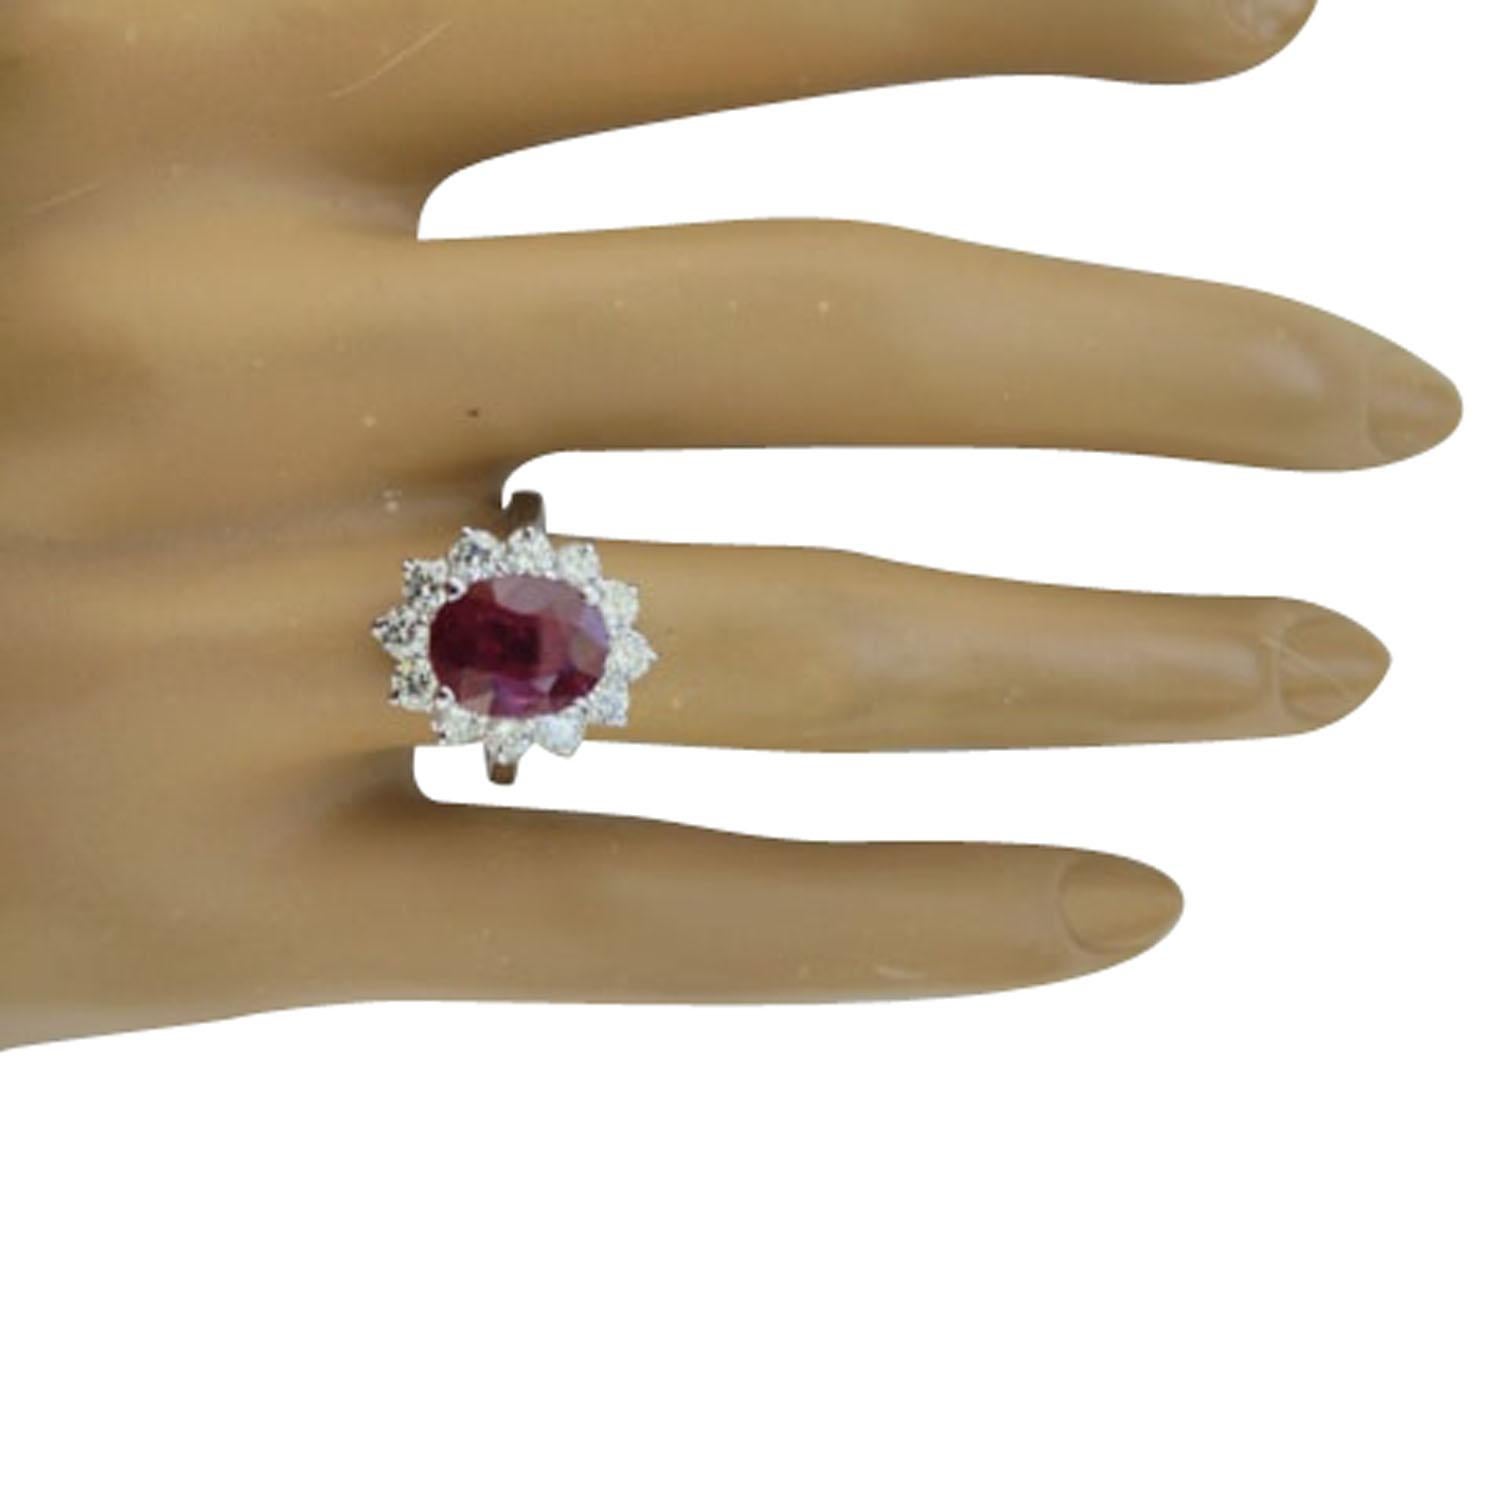 3.35 Carat Natural Ruby 14 Karat Solid White Gold Diamond Ring
Stamped: 14K 
Total Ring Weight: 4.5 Grams 
Ruby Weight: 2.45 Carat (10.00x8.00 Millimeters)  
Diamond Weight: 0.90 Carat (F-G Color, VS2-SI1 Clarity )
Quantity: 12
Face Measures: